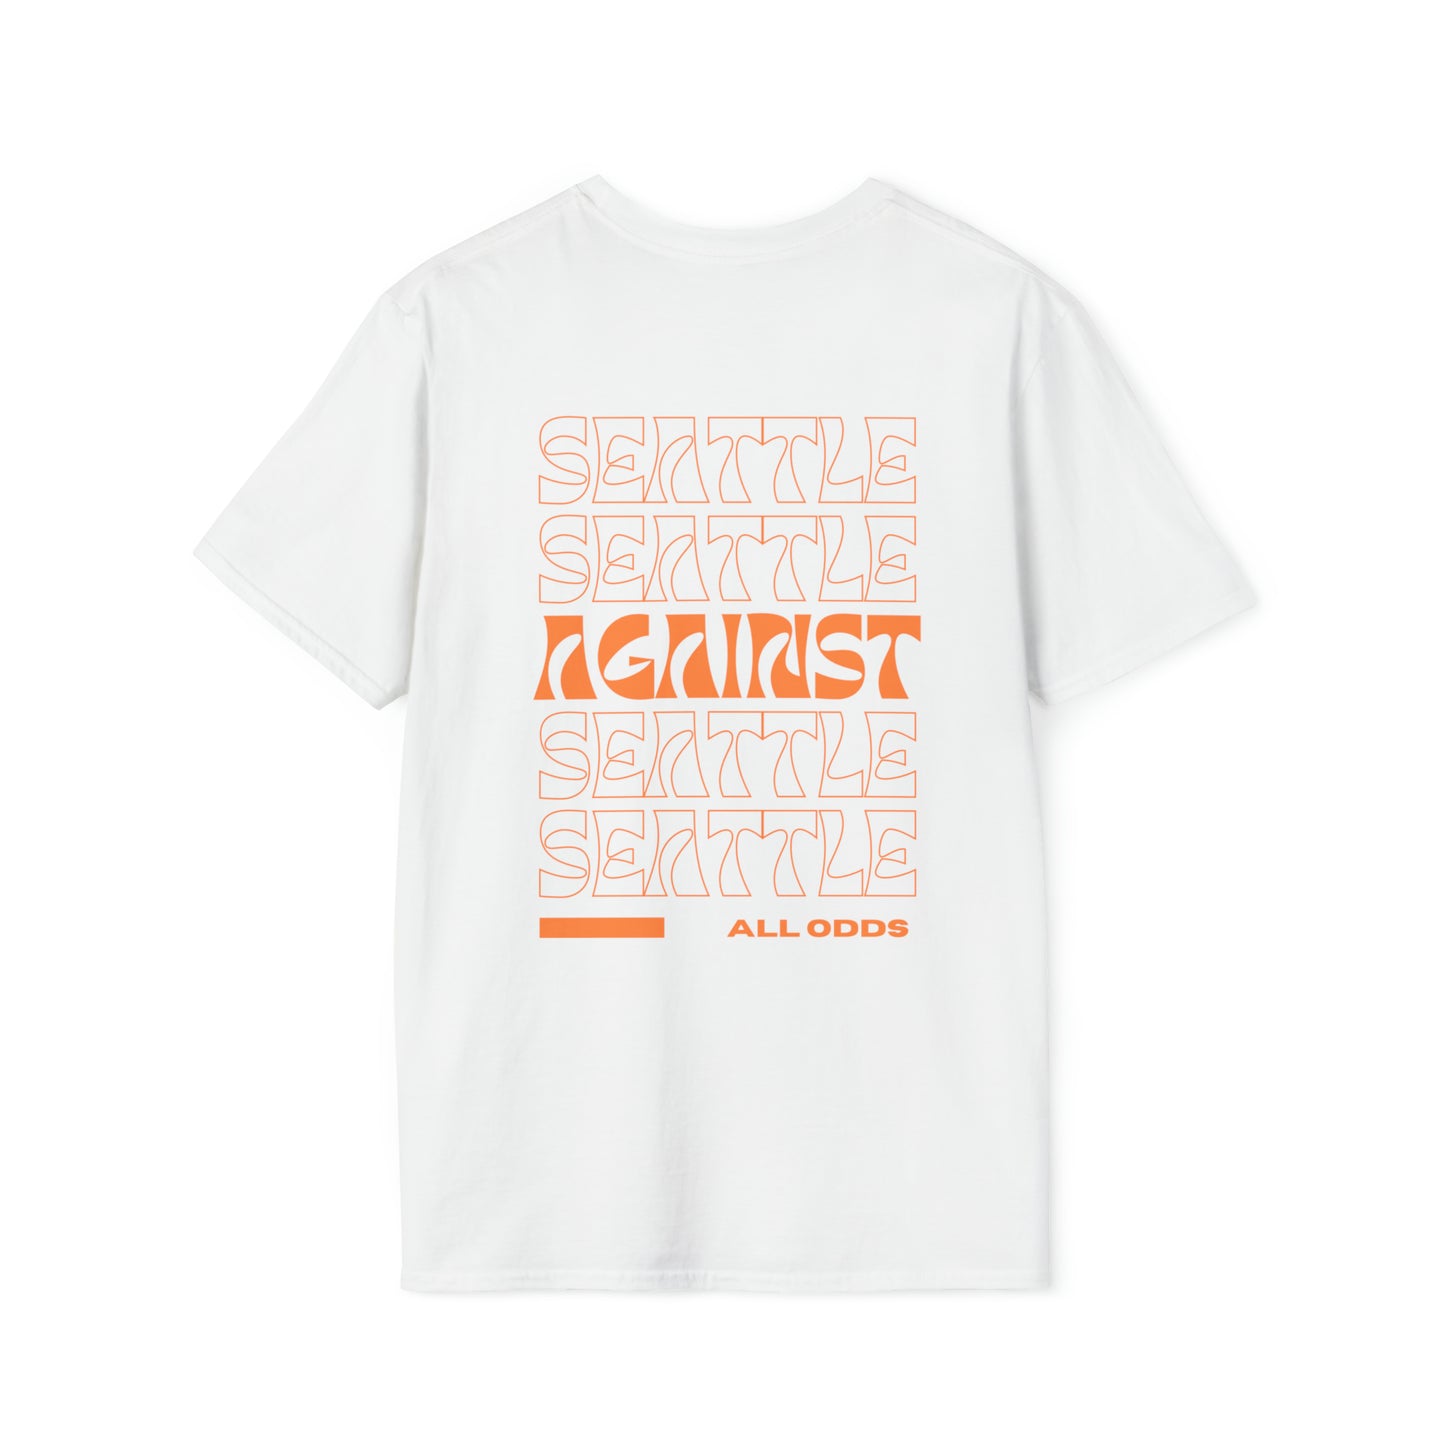 Seattle - Against All Odds T-Shirt